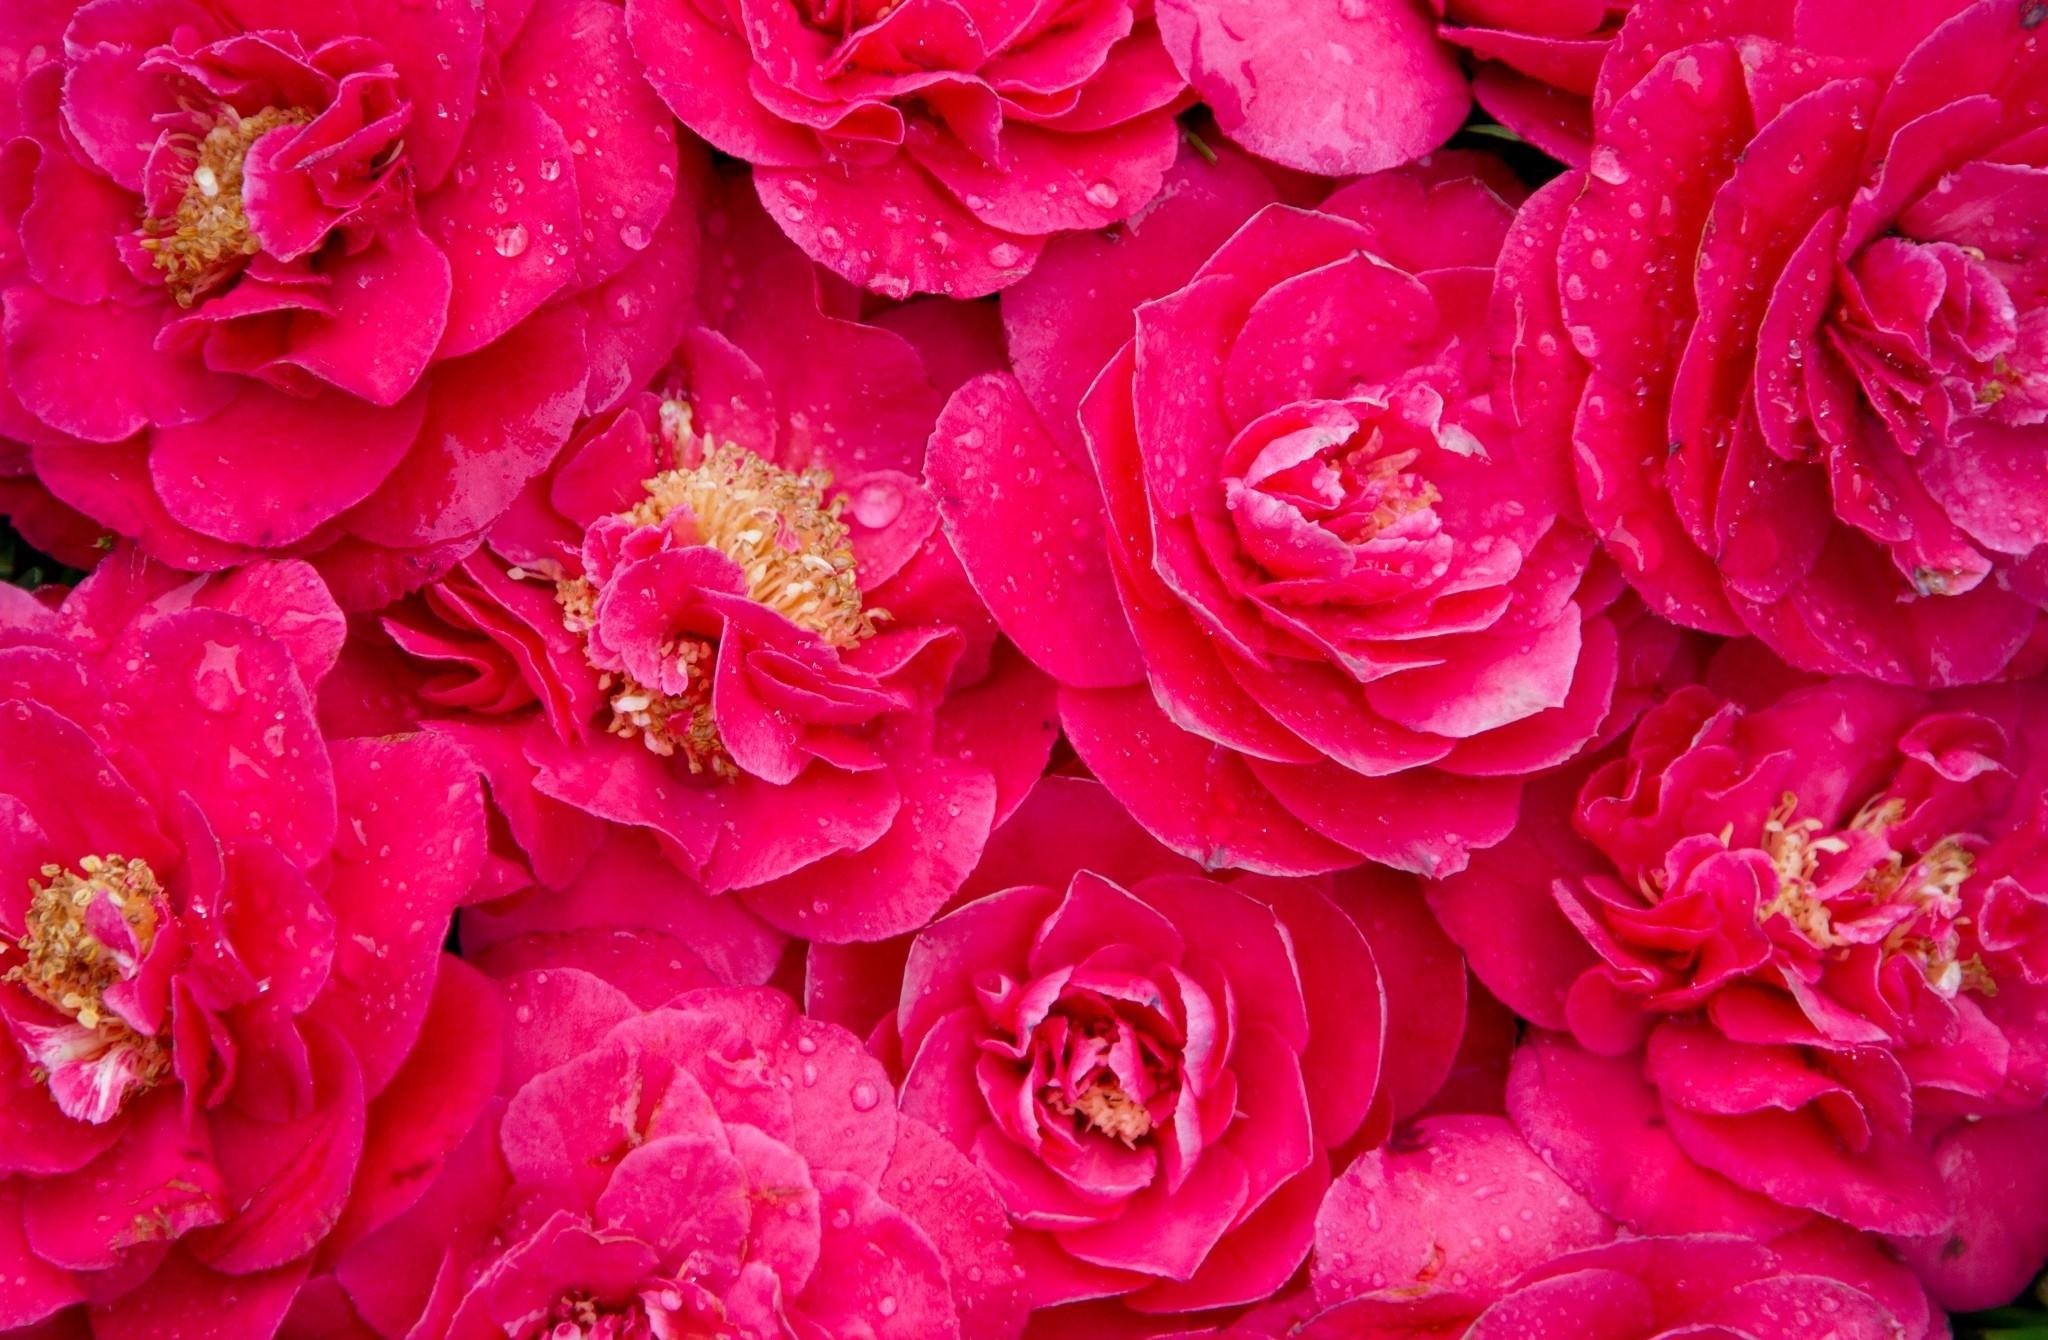 drops, flowers, pink, freshness, lot, camellia iphone wallpaper